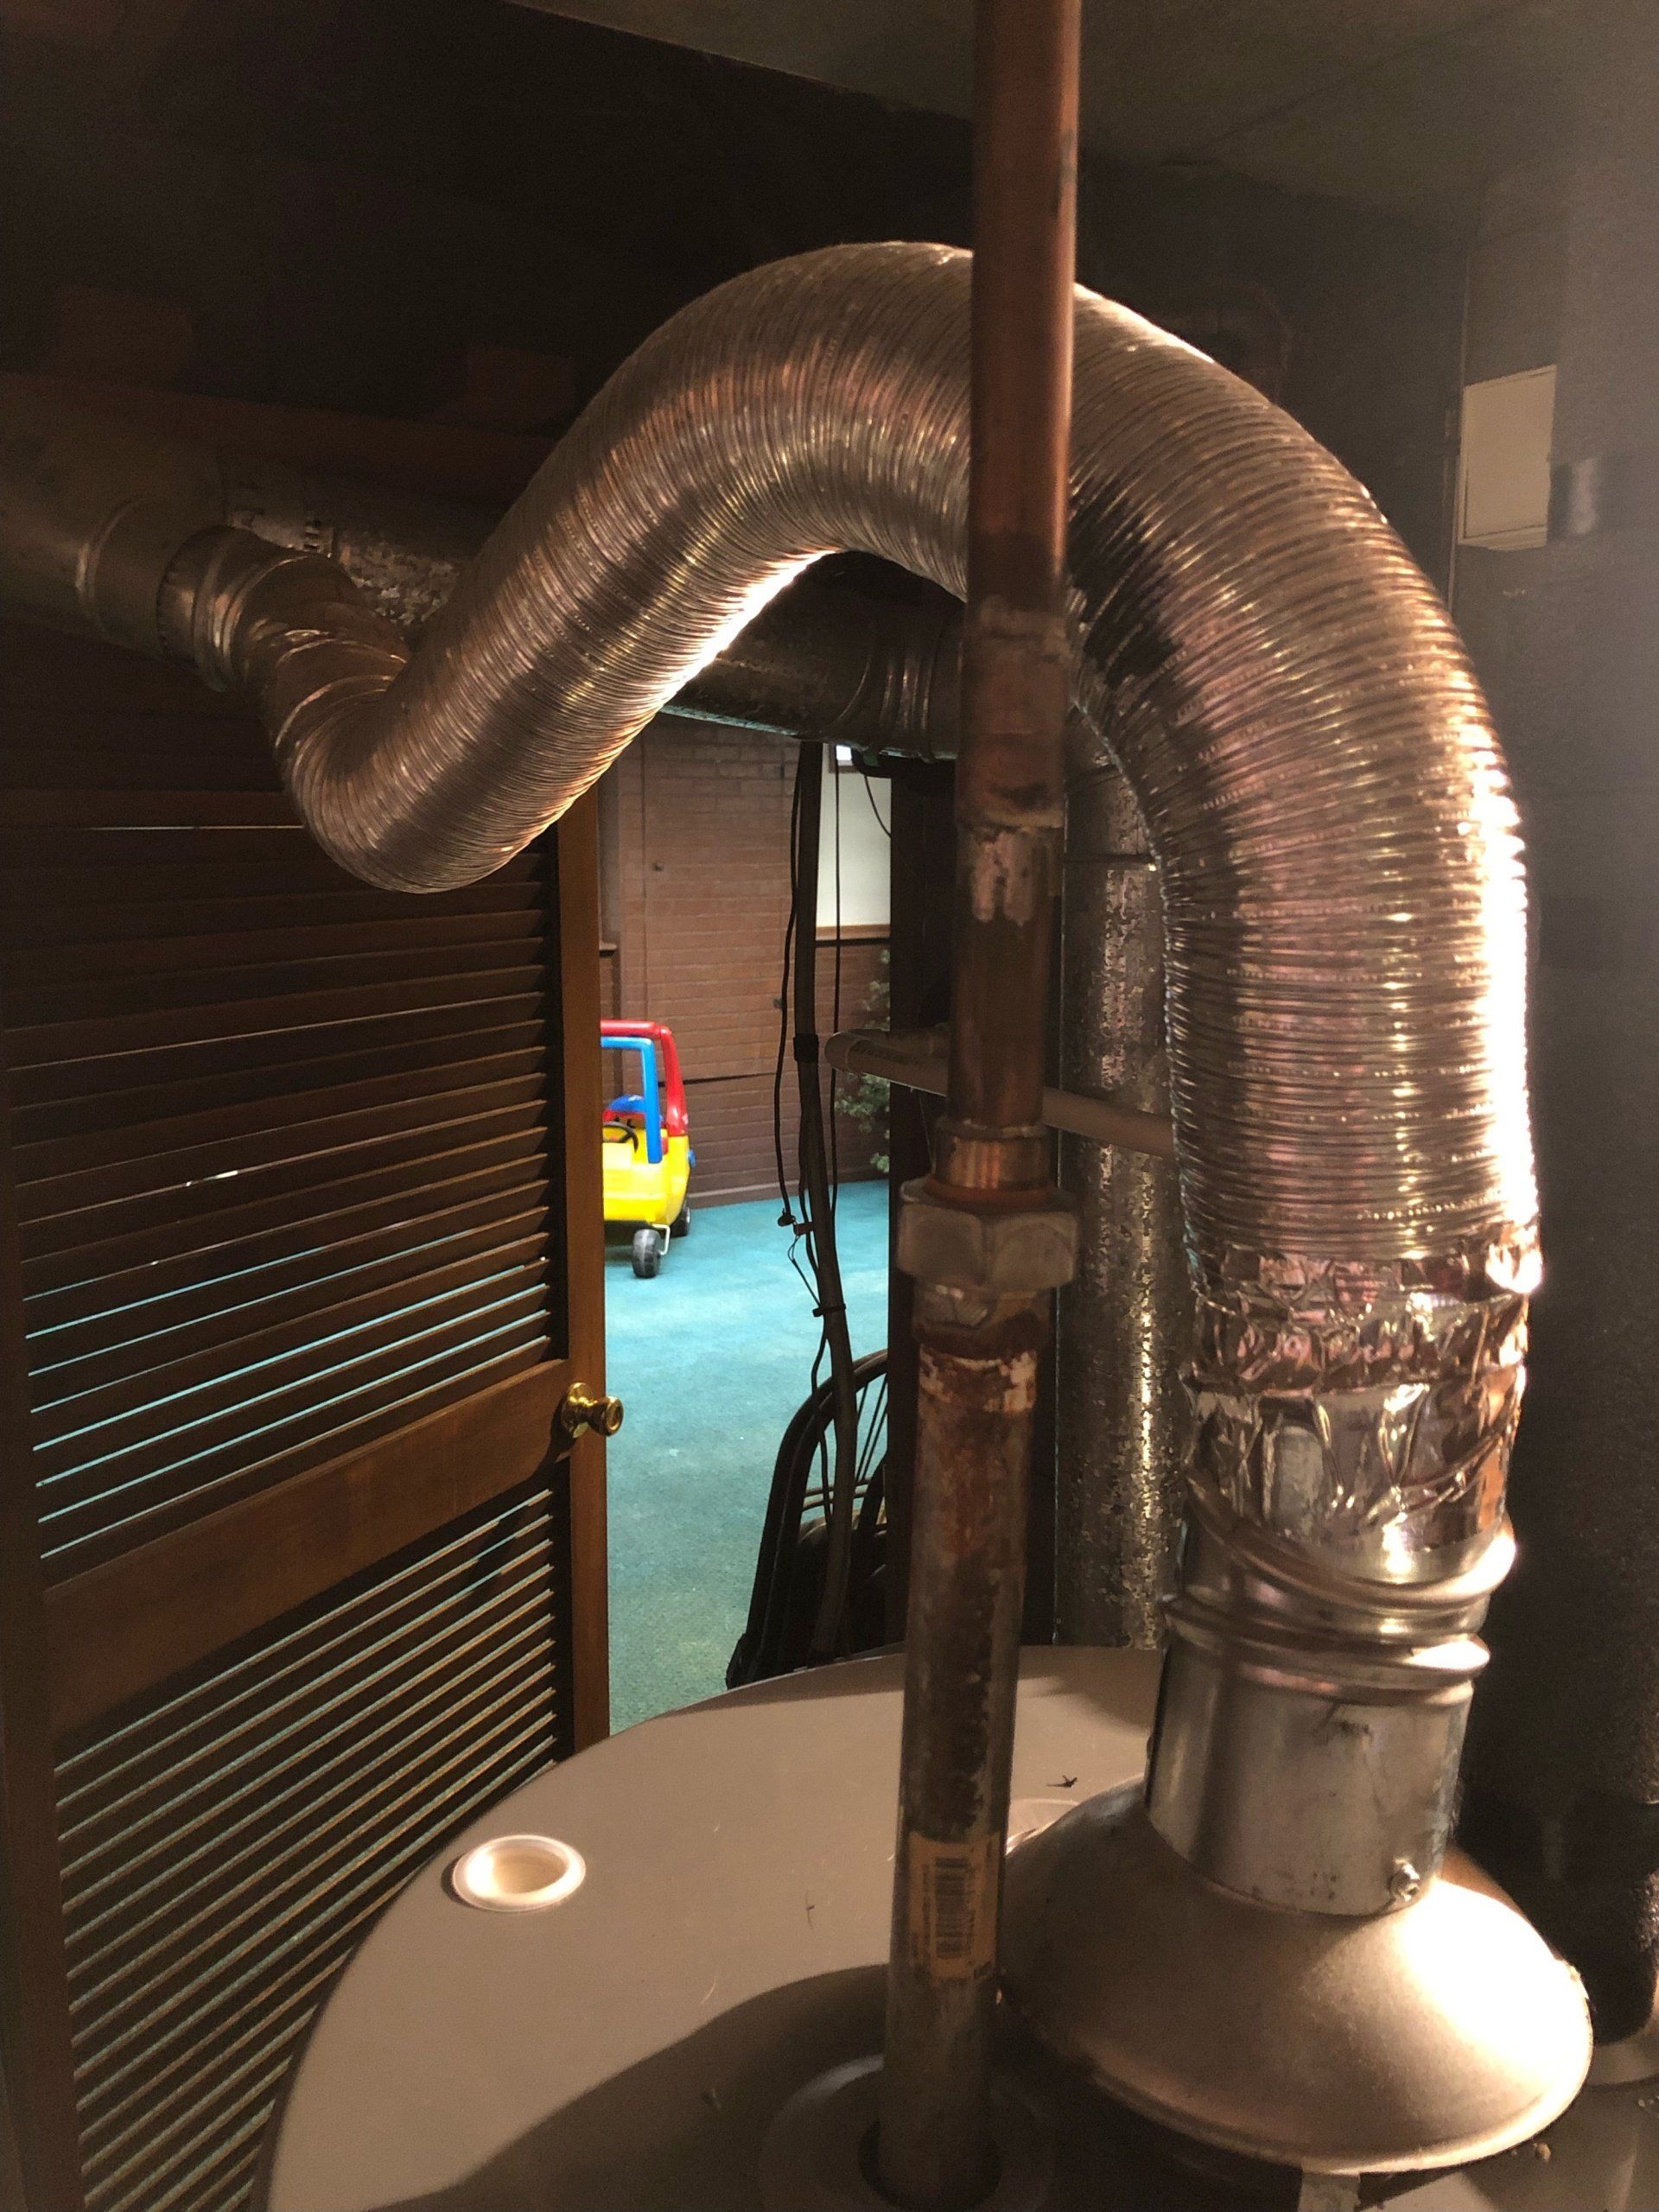 Dryer Venting on a Standard Atmospheric Water Heater